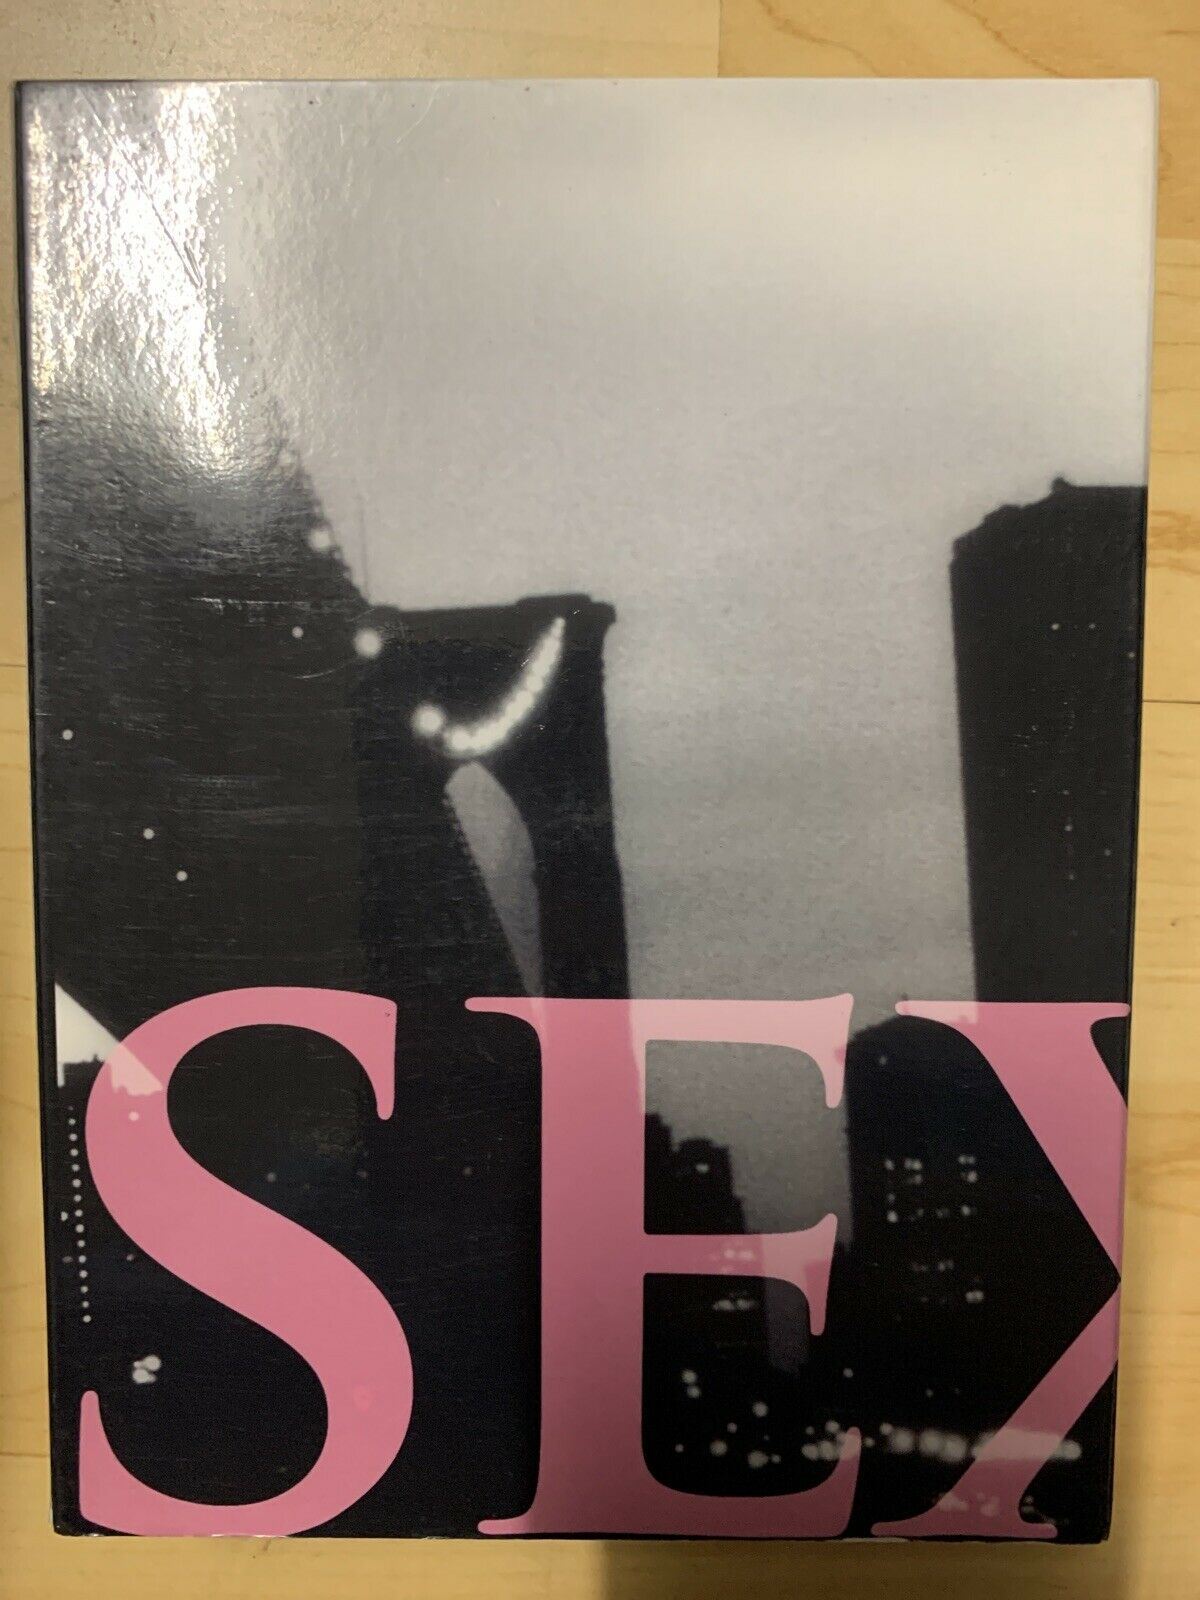 SEX AND THE CITY THE COMPLETE SERIES 1, 2, 3, 4, 5 & 6 DVD SET & Movies 1 & 2